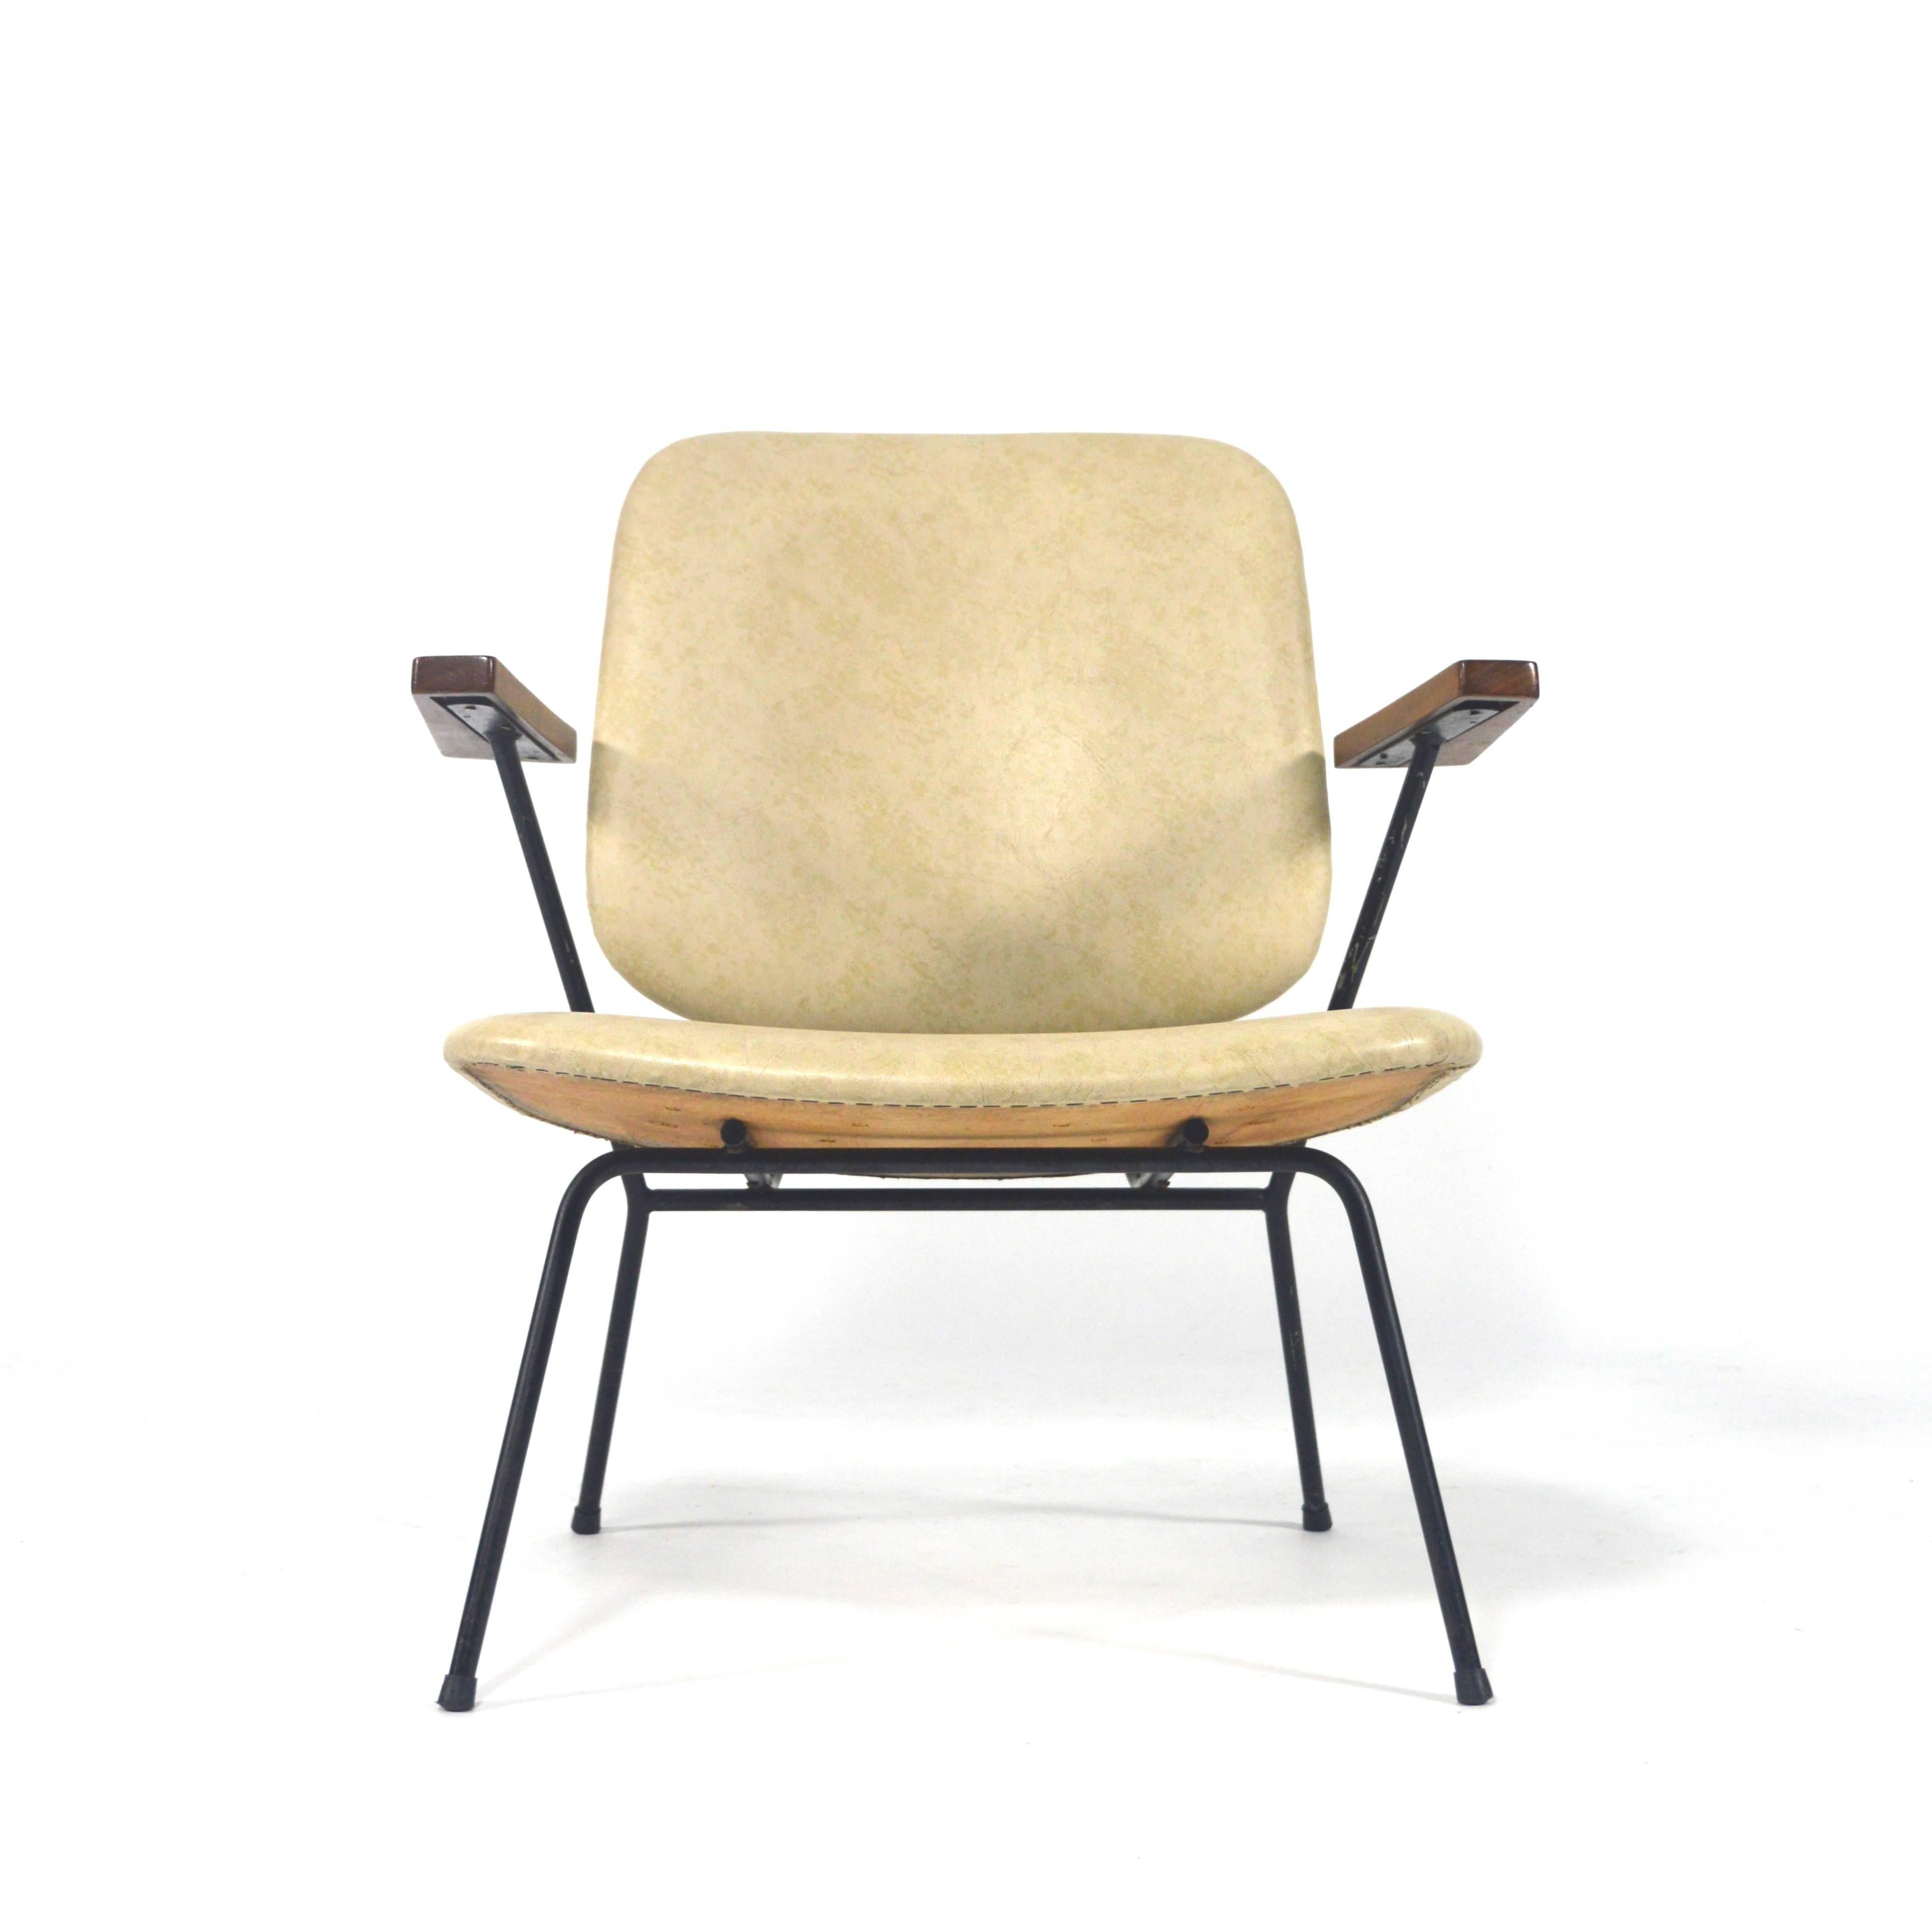 Rare model easy chair by Willem Hendrik Gispen for Kembo.
Original Faux leather upholstery with solid Teak armrests and a black lacquered metal base.